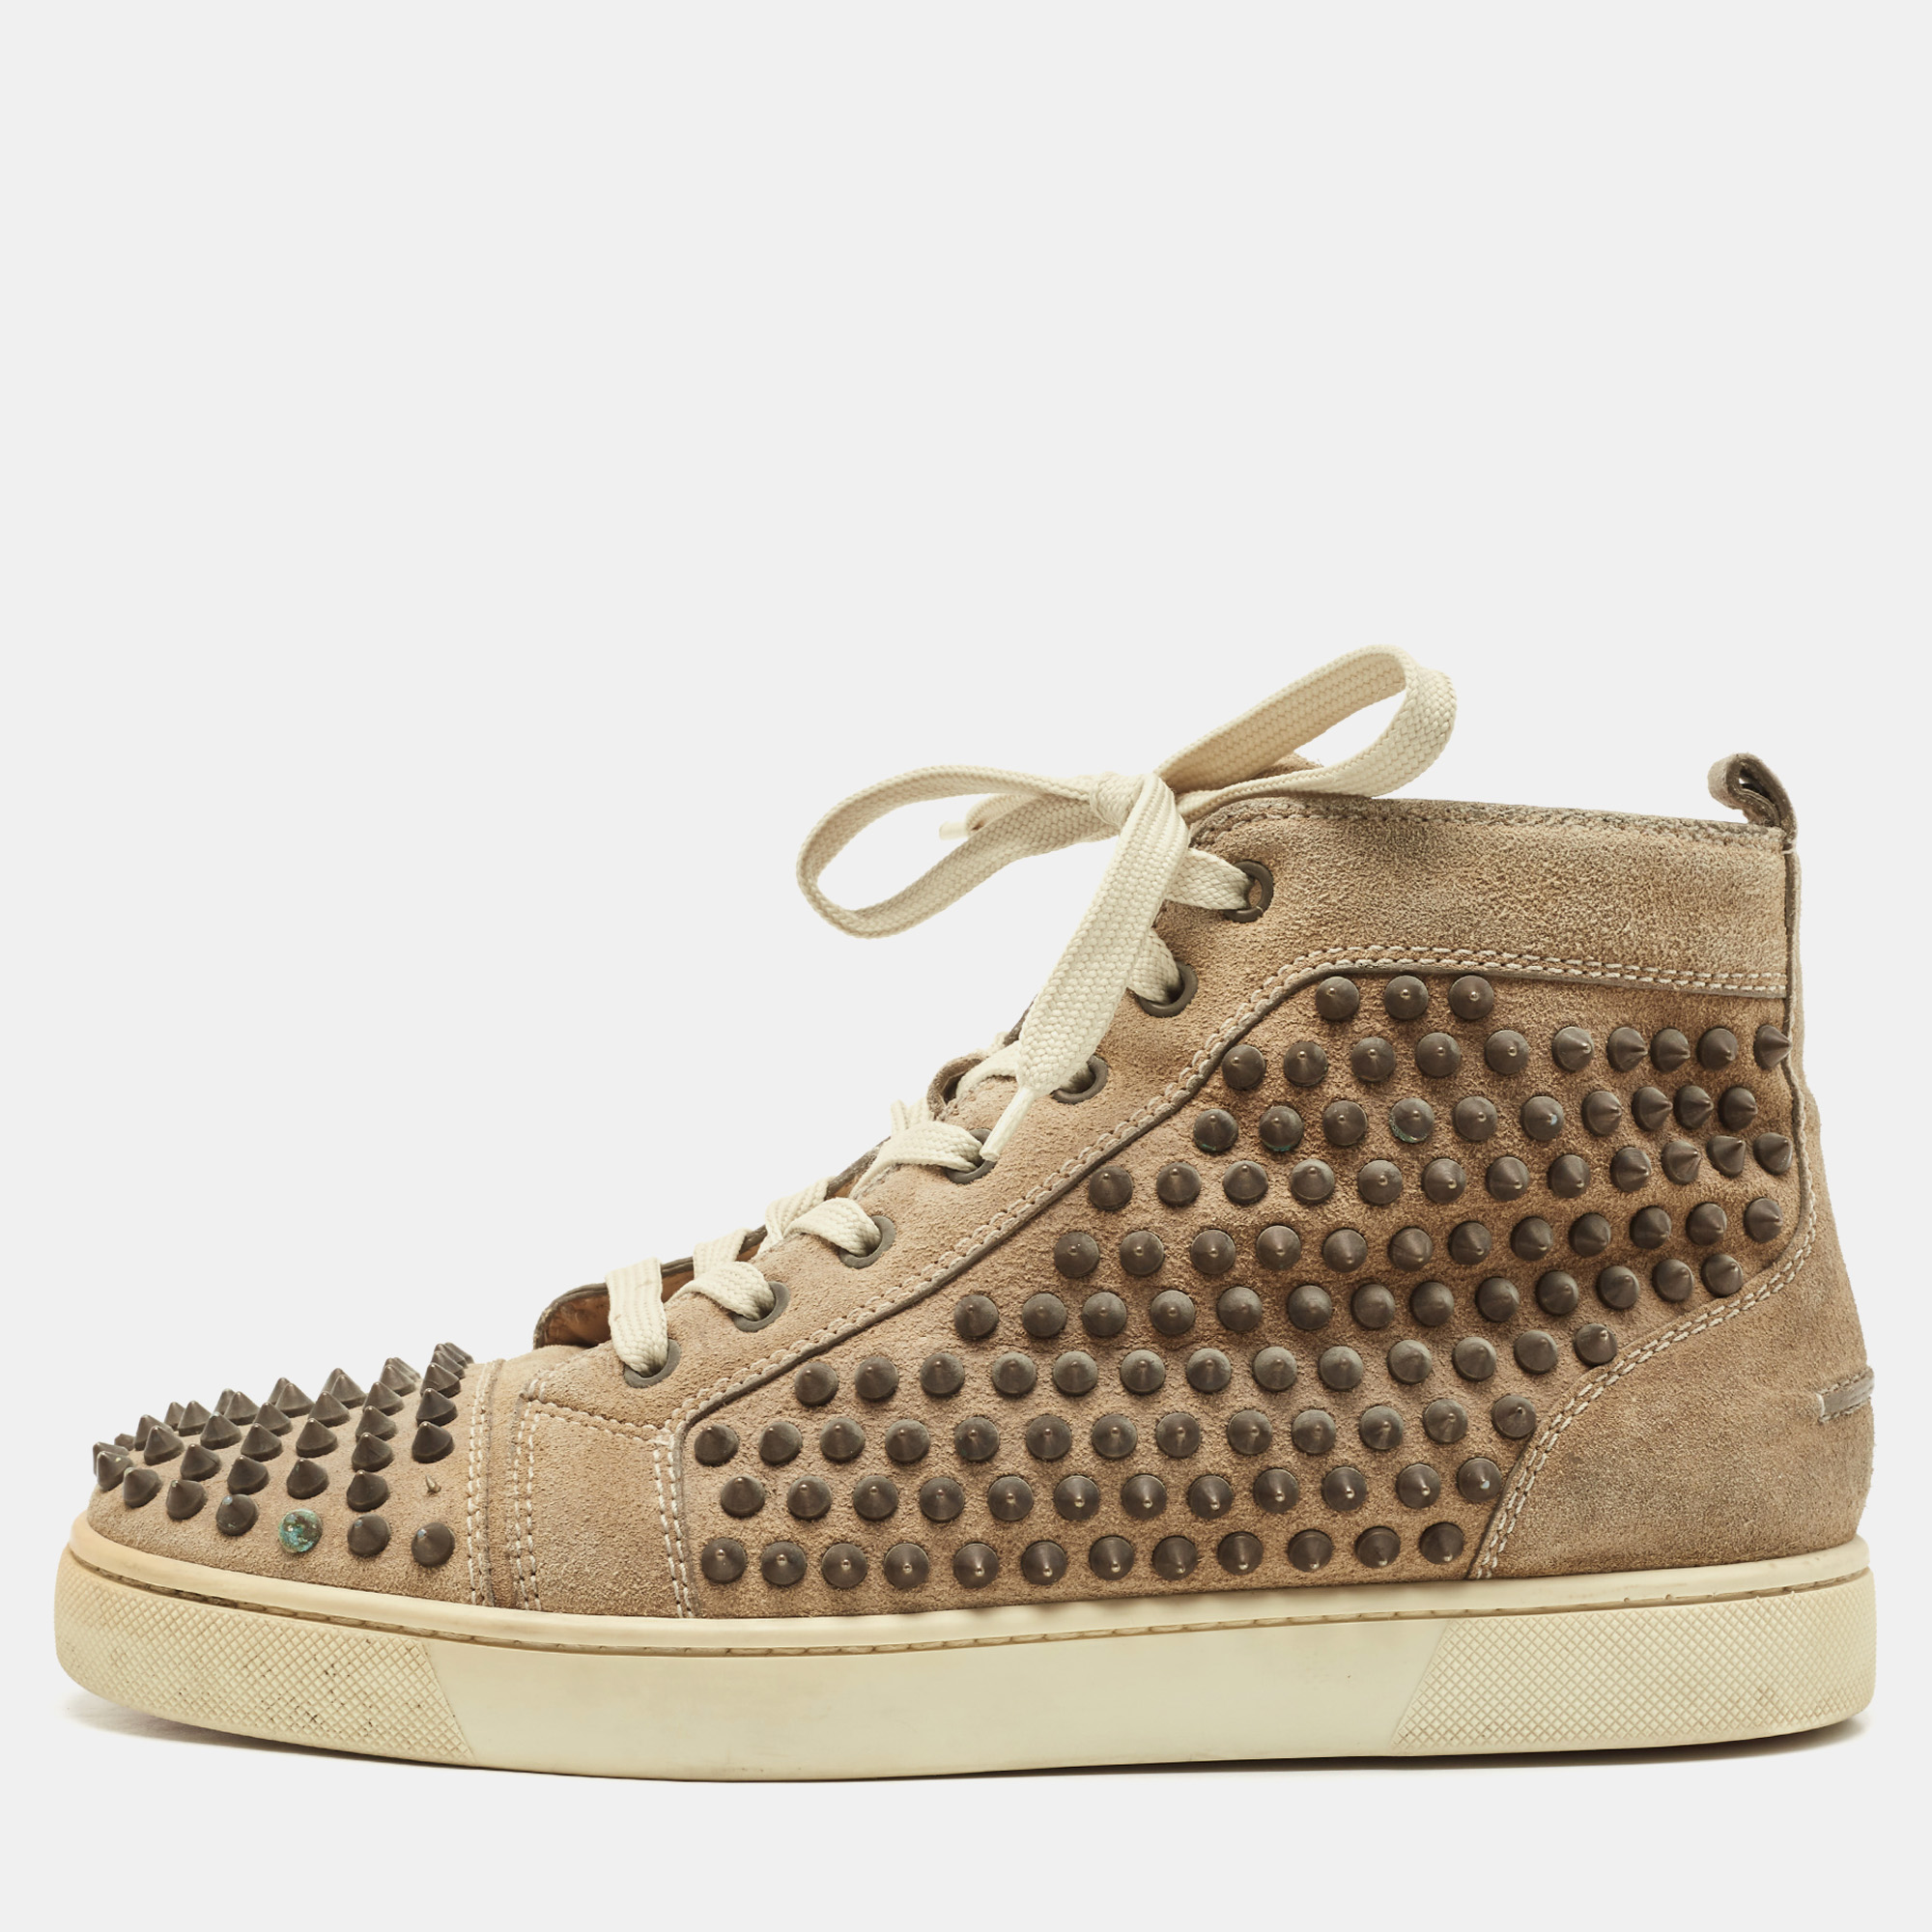 Christian Louboutin Brown Suede Spike High Top Sneakers Size 41